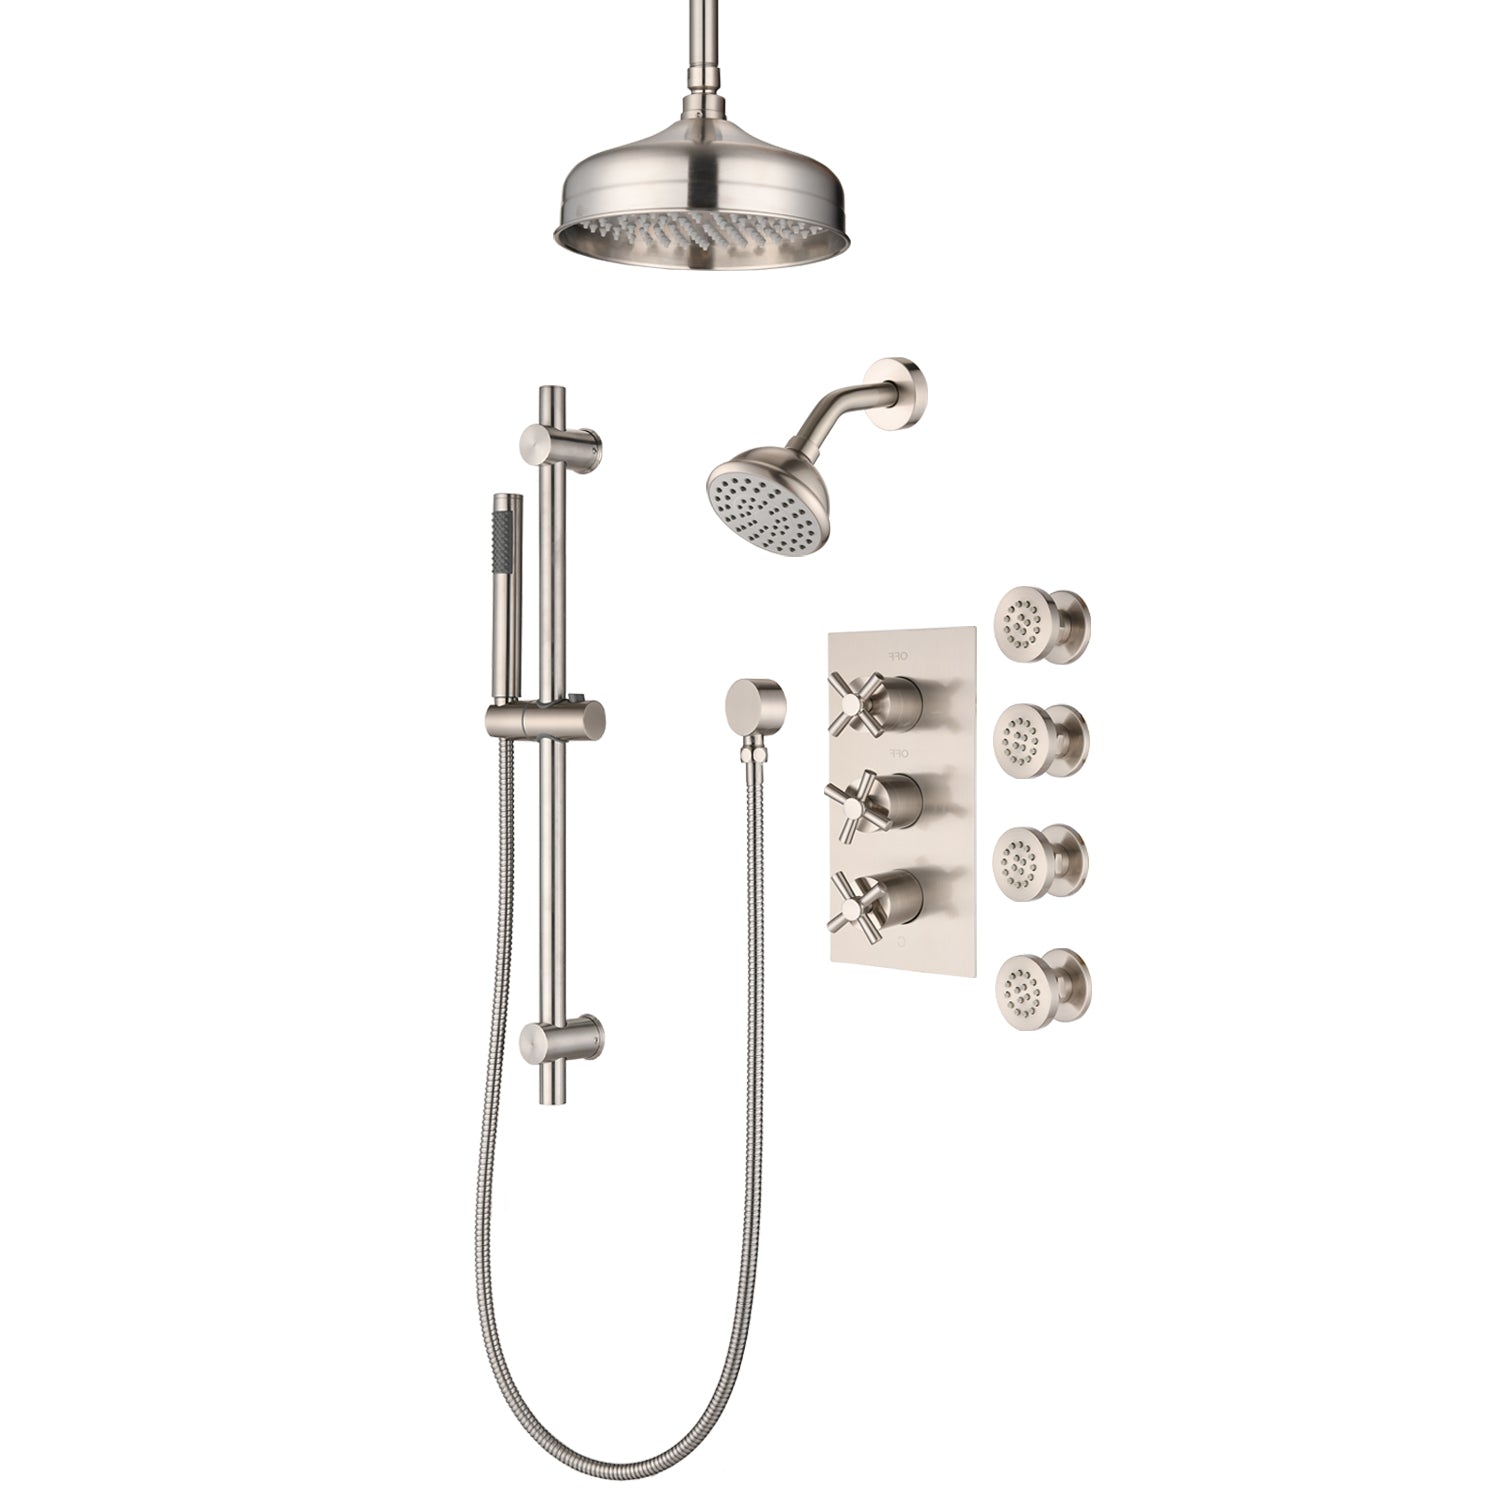 Boyel Living 8-inch Wall Mount and Ceiling Mount Shower System with 4 Body Sprays in Brushed Nickel-Boyel Living